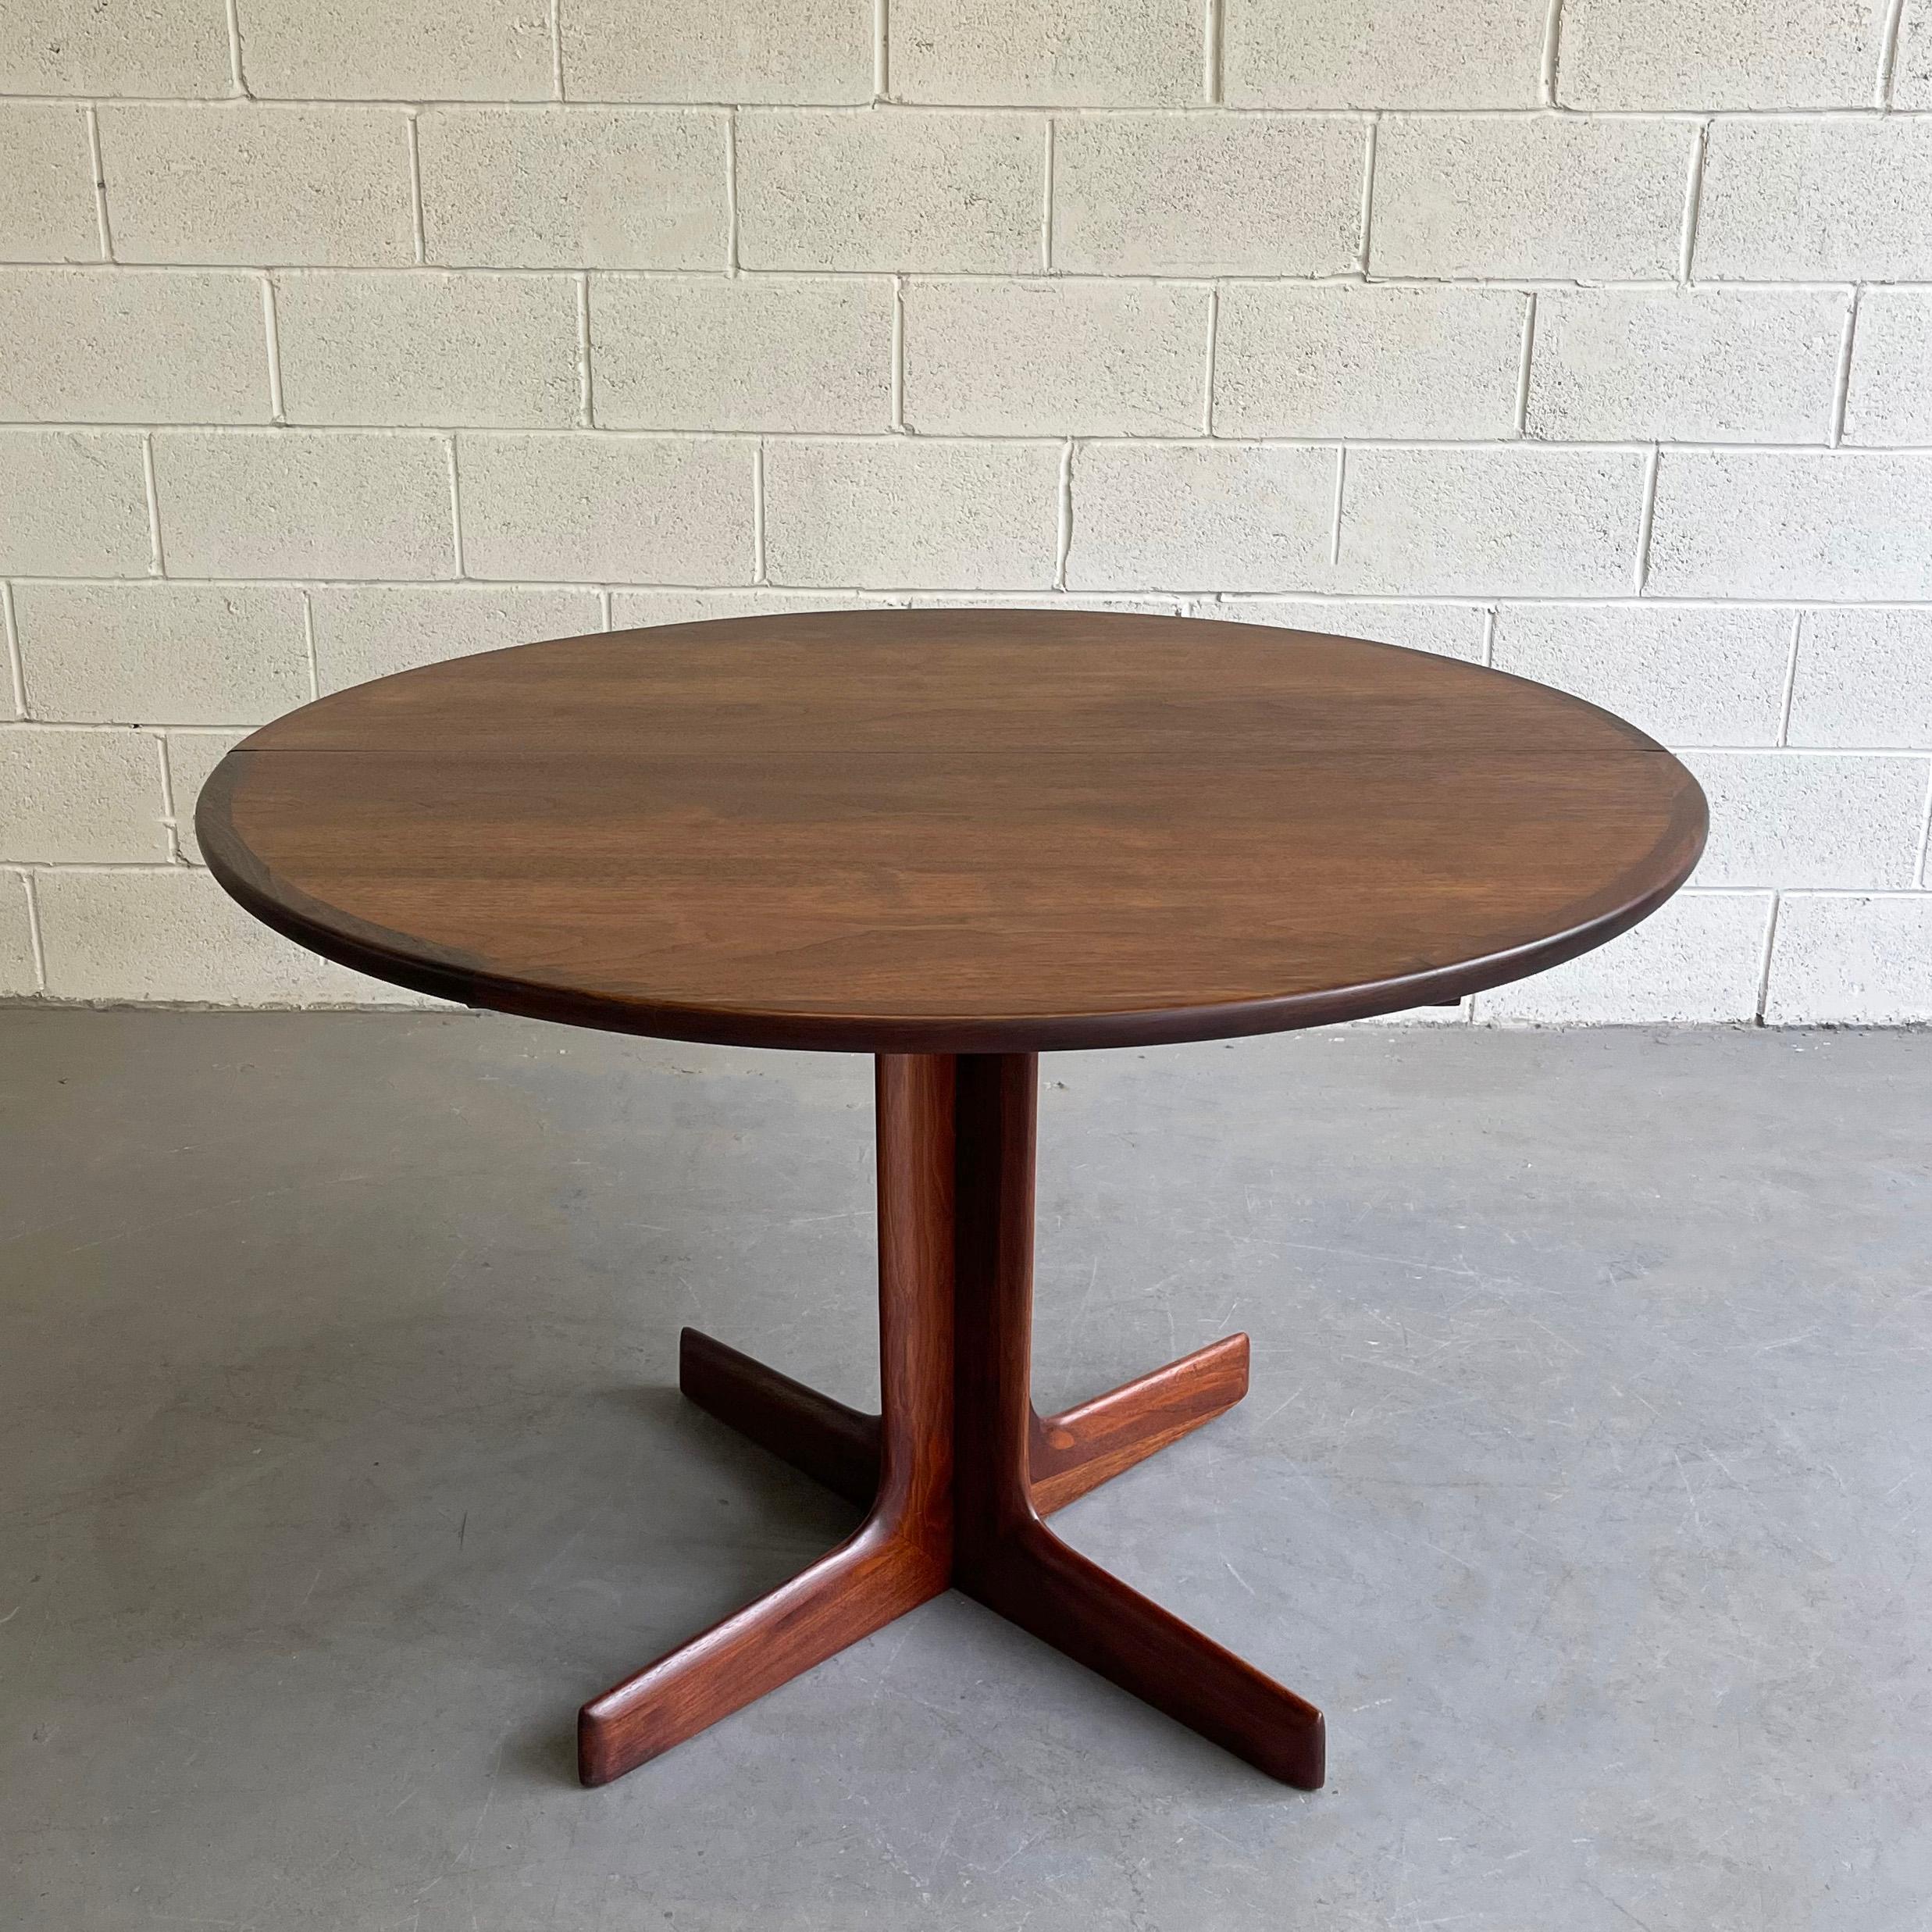 Mid-Century Modern, round, walnut dining table with pedestal base extends to 81 inches with two separate 18 inch leaves.